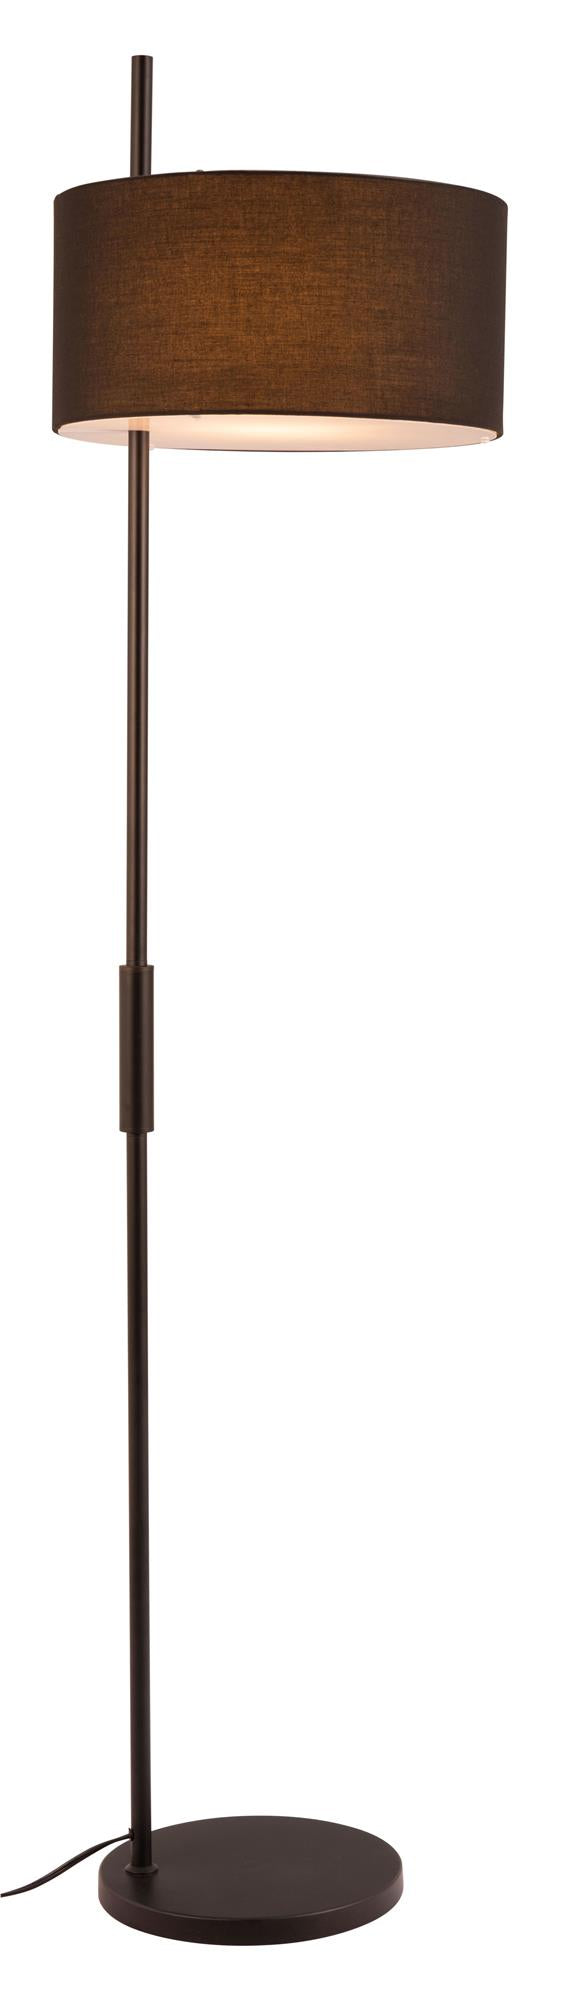 Floor lamp with dimmable feature by Brie -  N/A